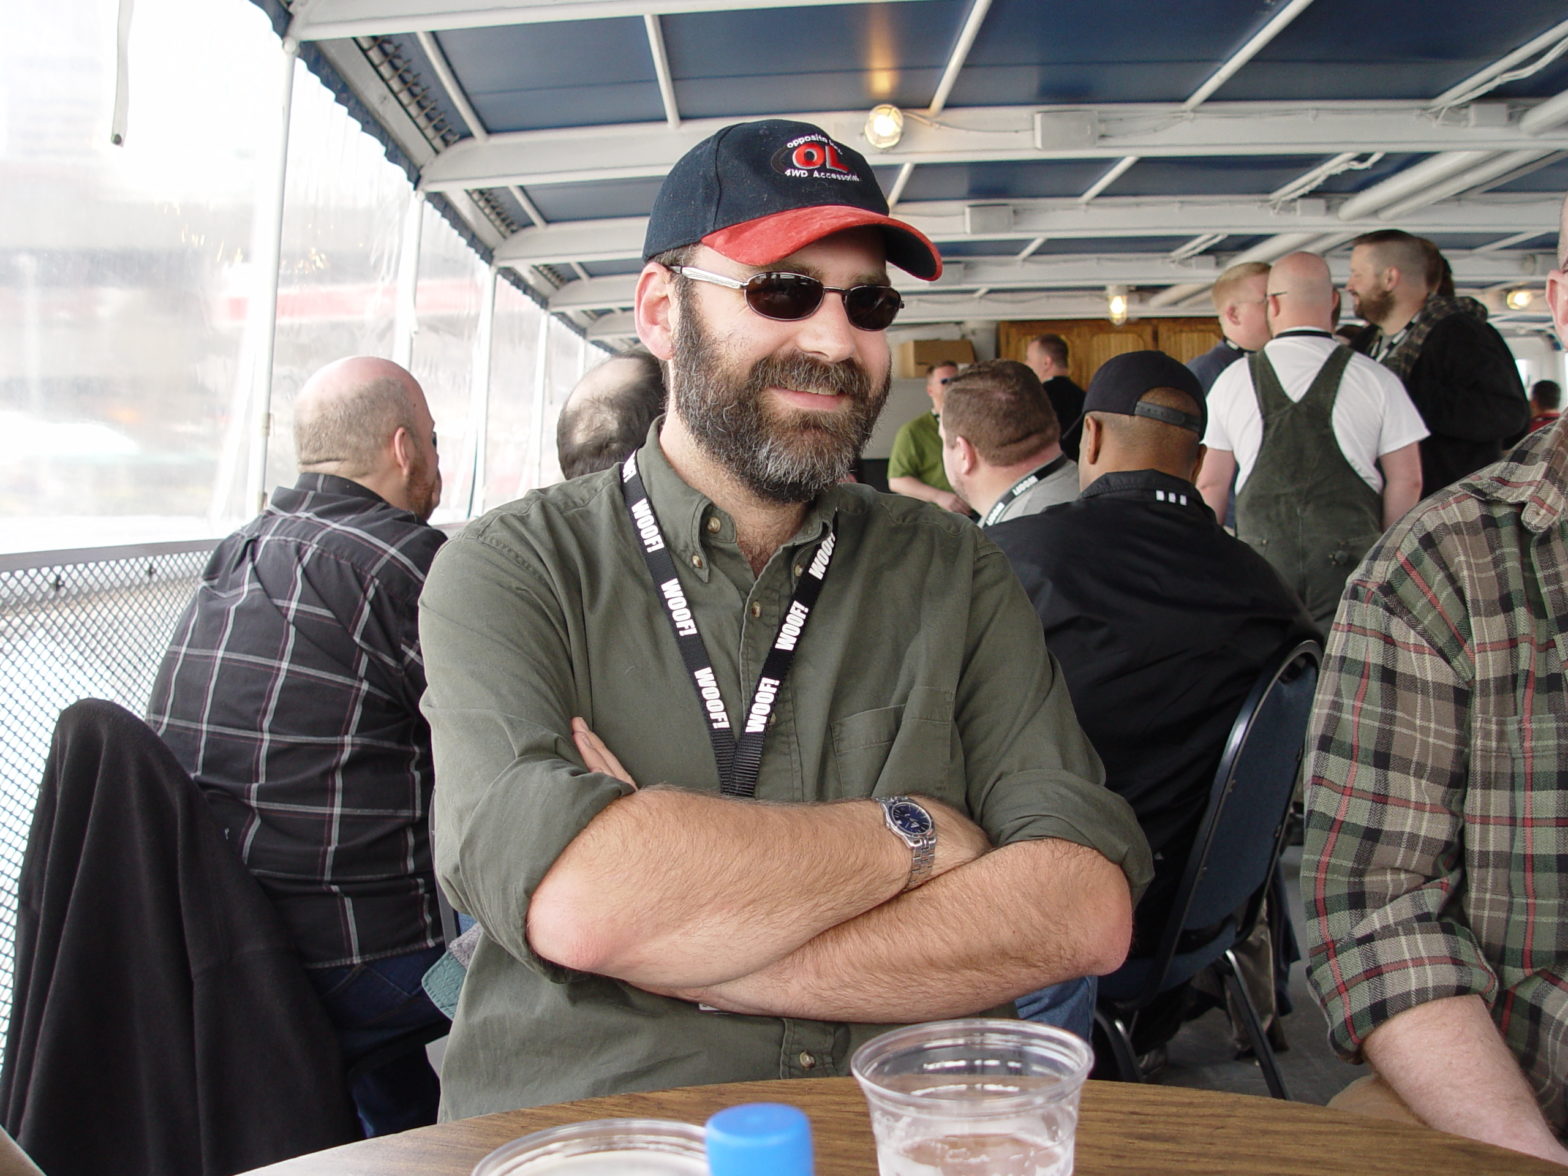 A man with a beard, sunglasses and baseball cap. Arms crossed on a ferry